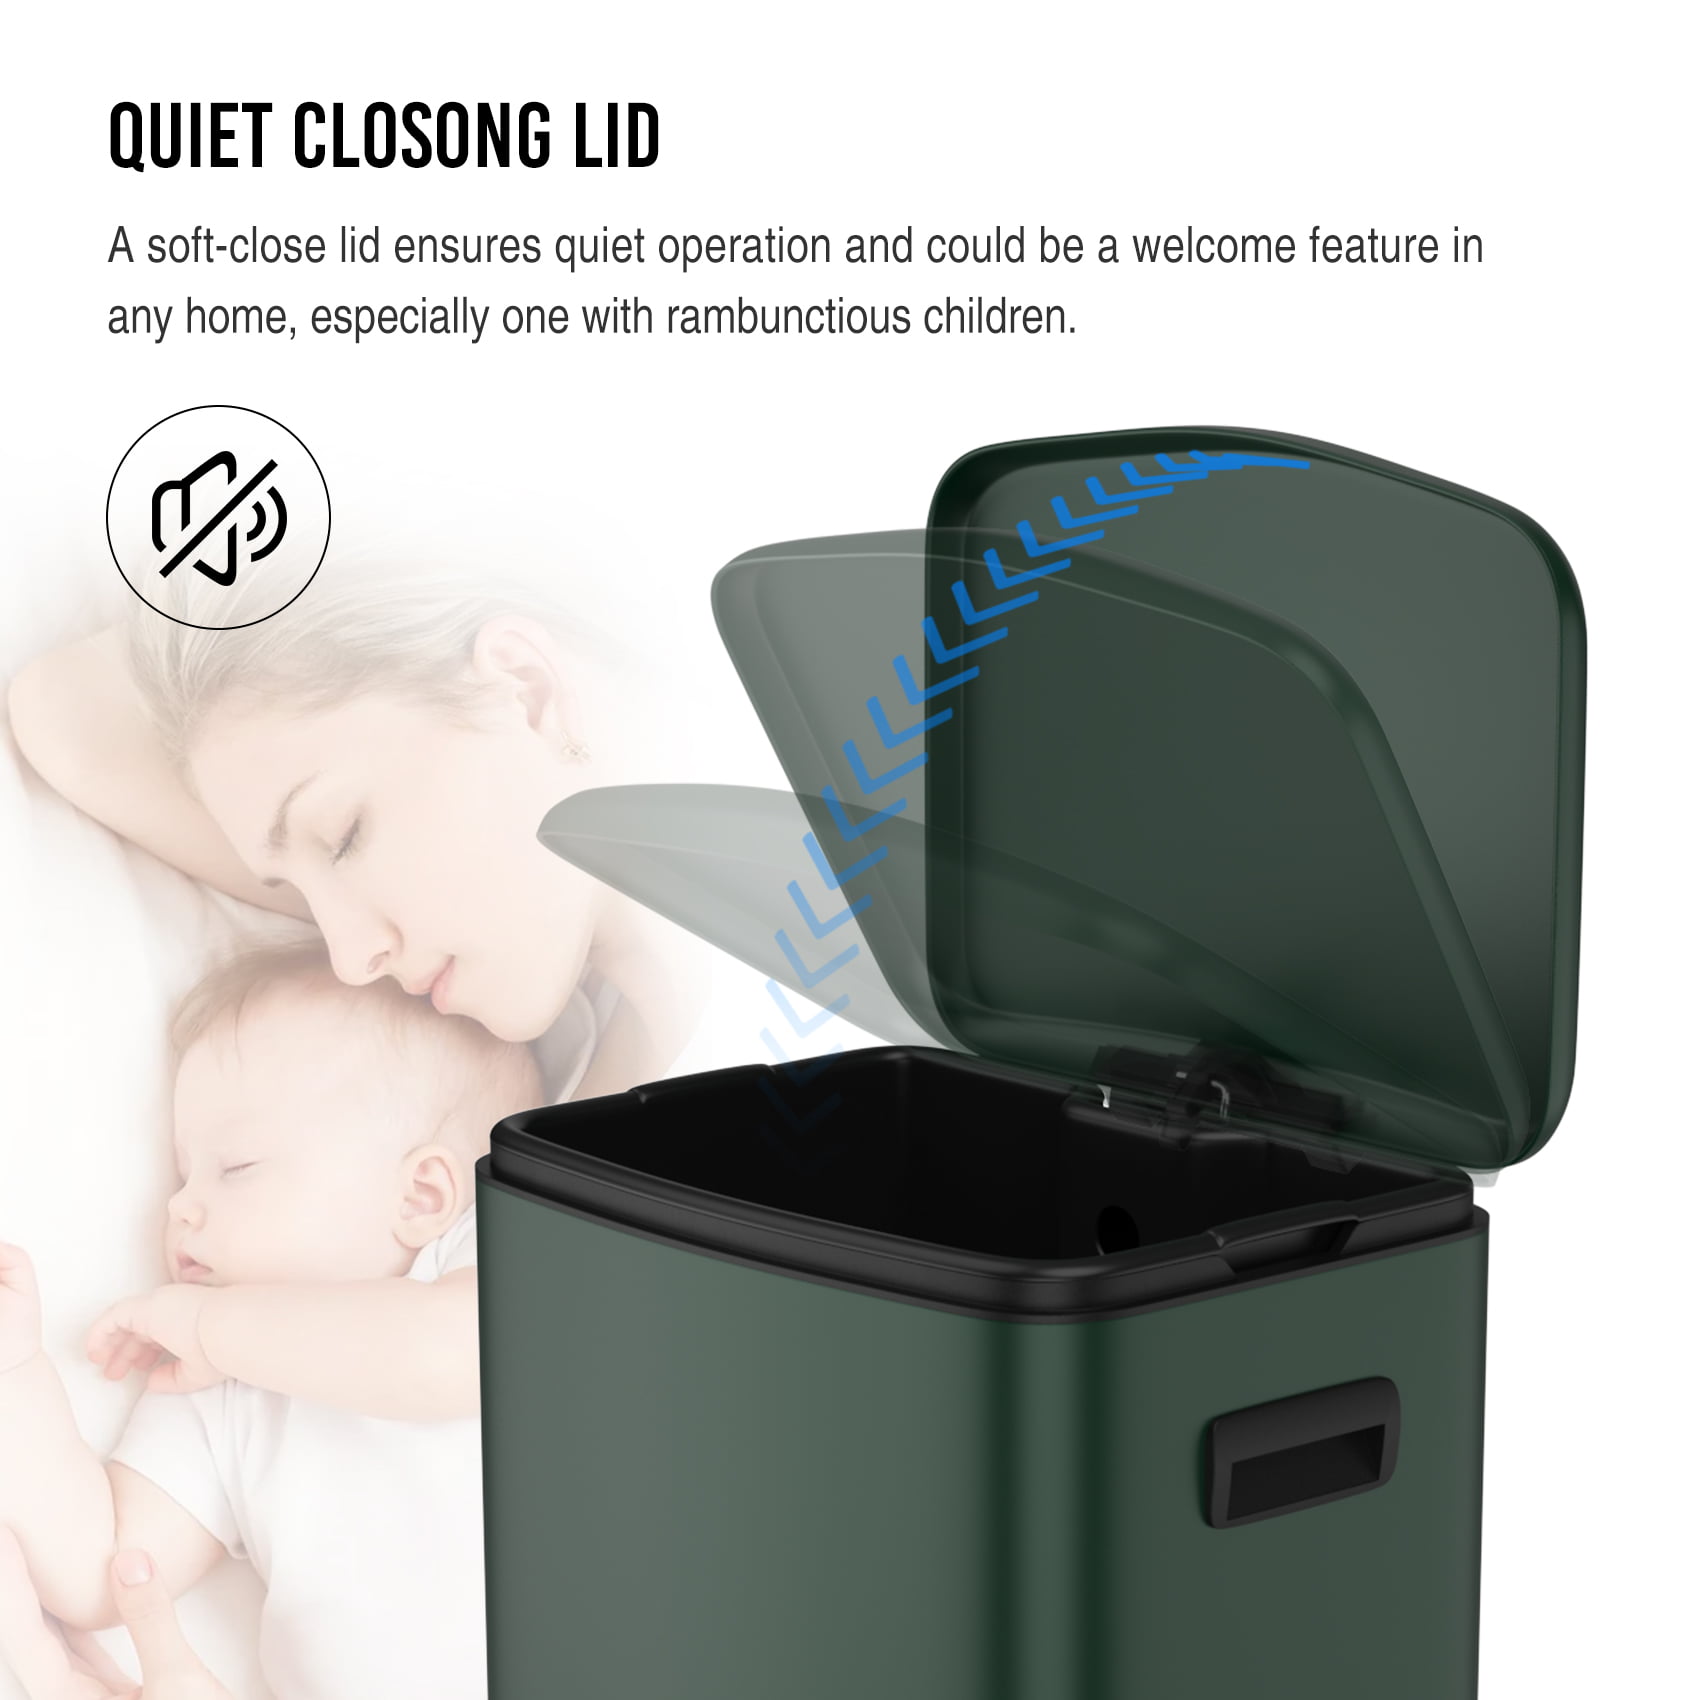 Source Stocked fiberglass big capacity 50L plastic waste can trash bin with  foot pedal on m.